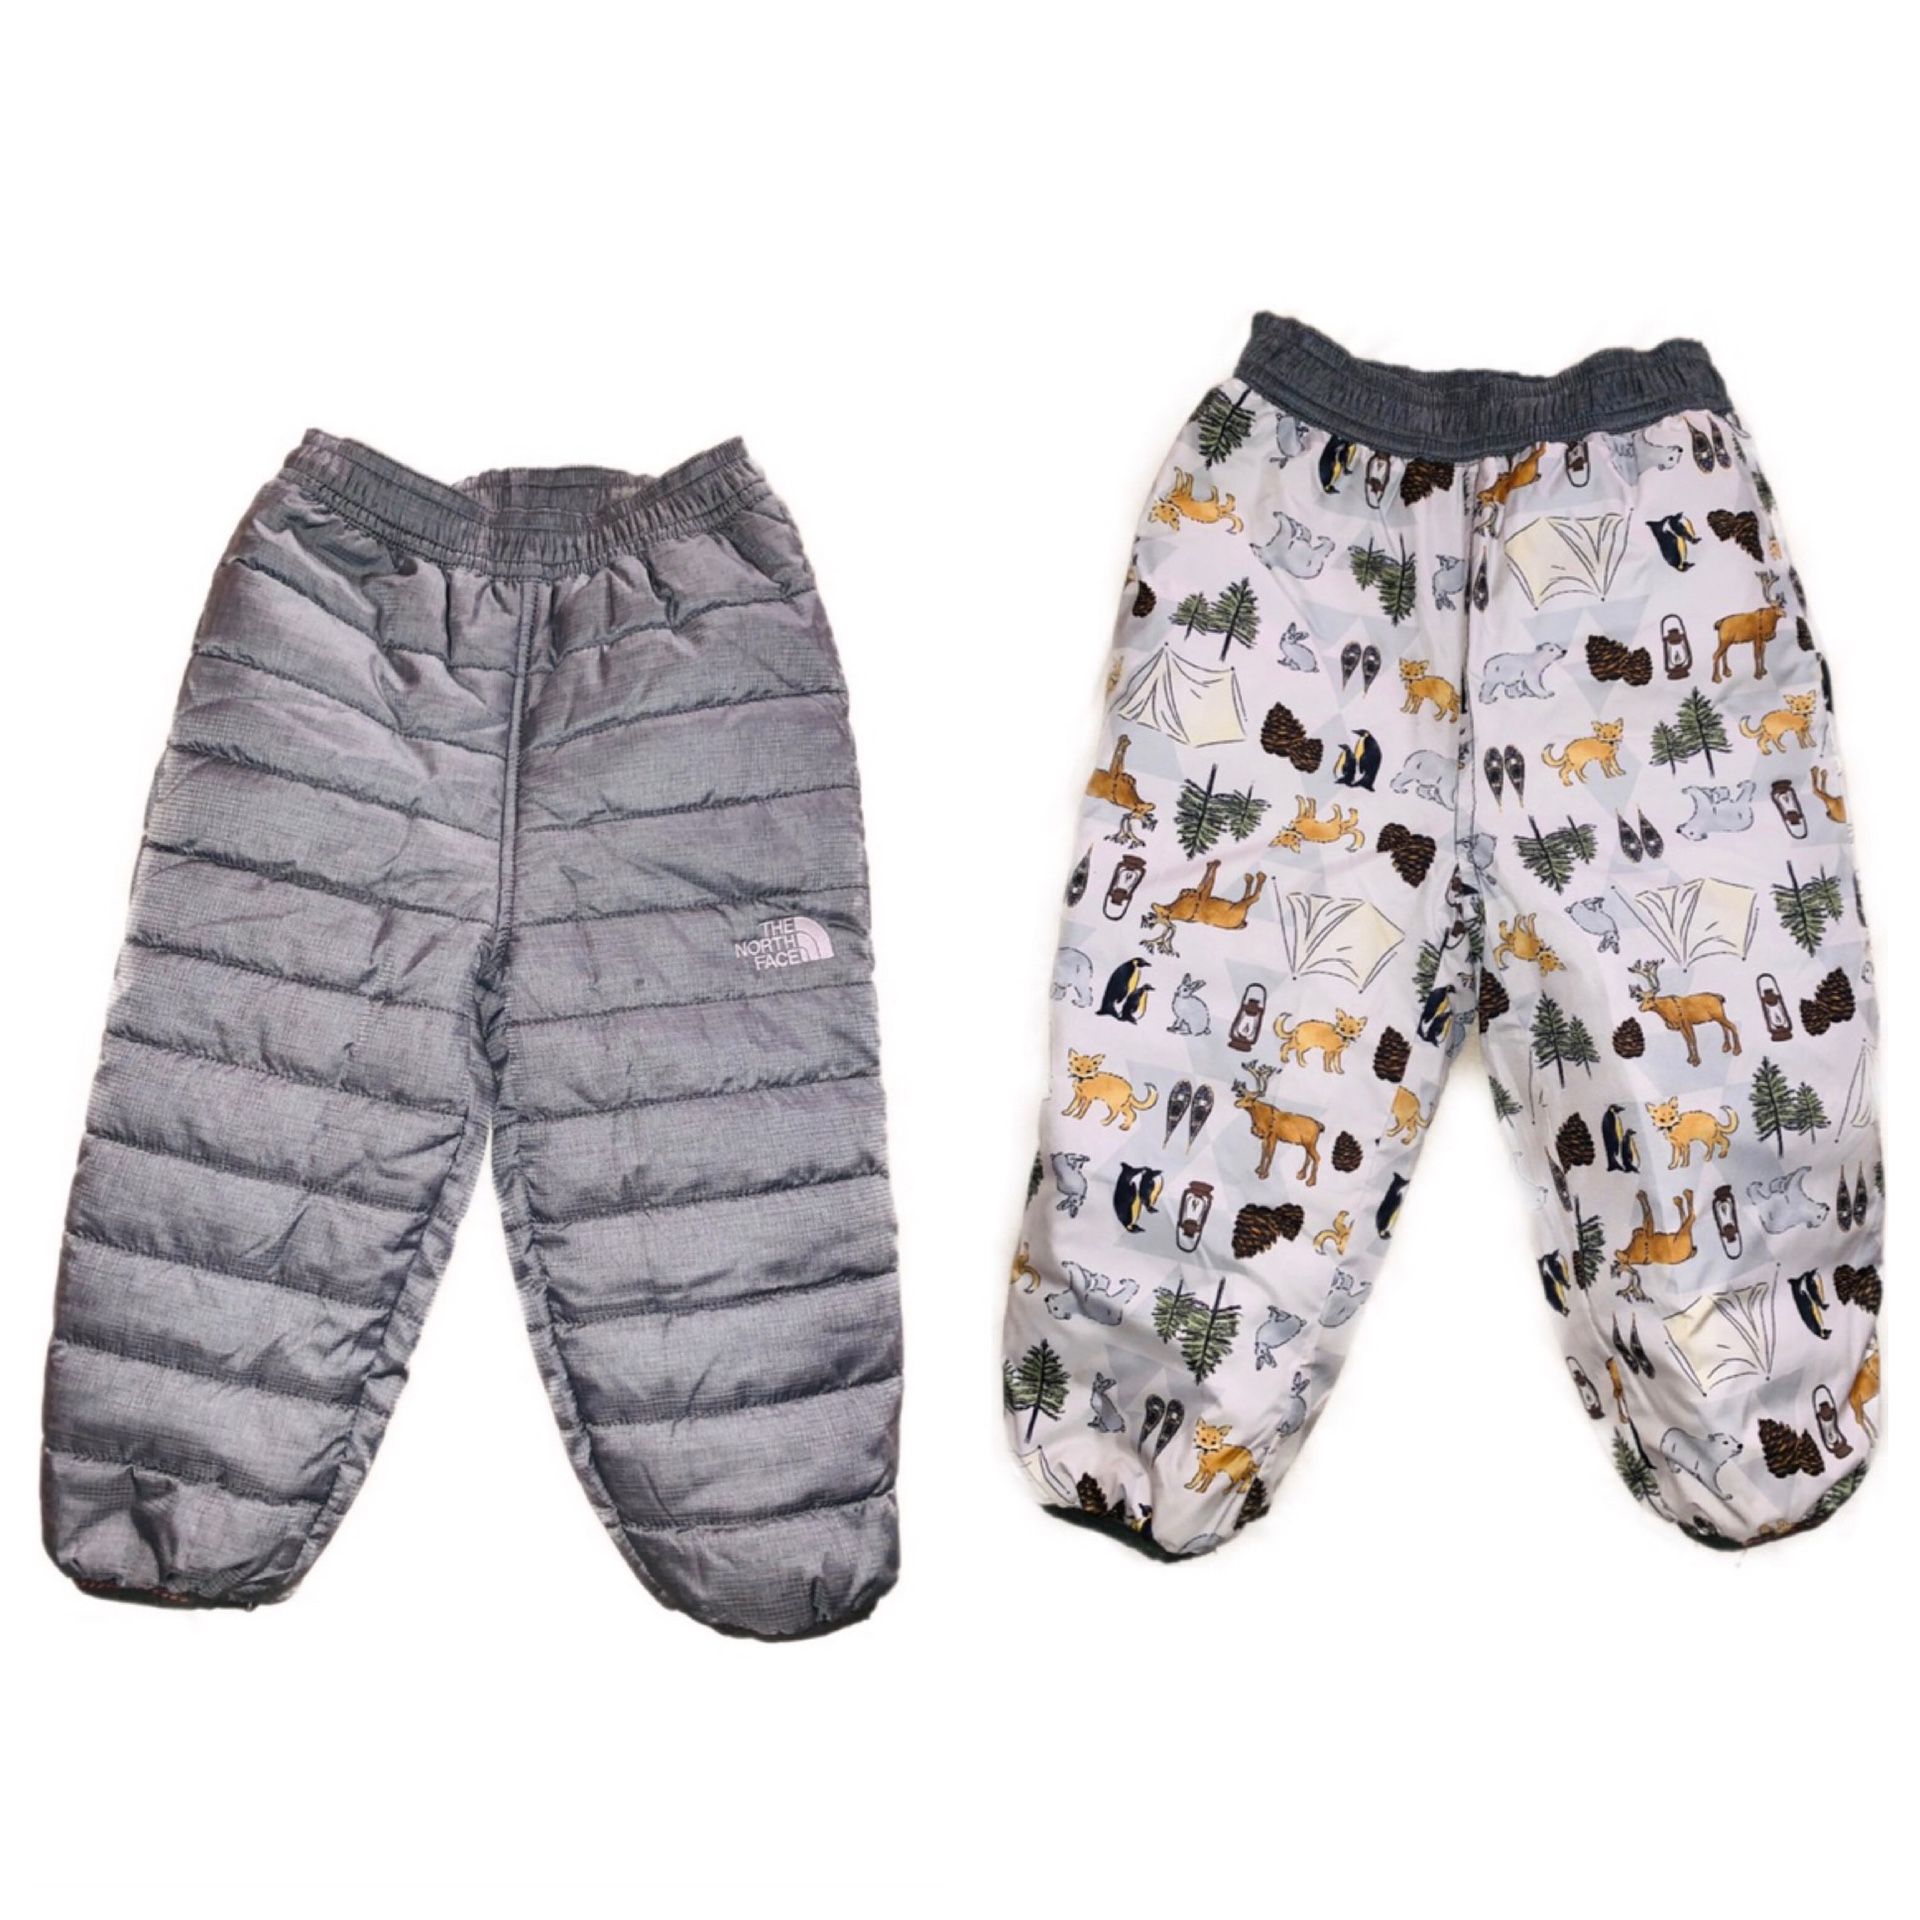 RARE North Face Toddler Kids Snow Pants (Reversible, Grey) Clothing Clothes — Boys/Girls 2T Like-New